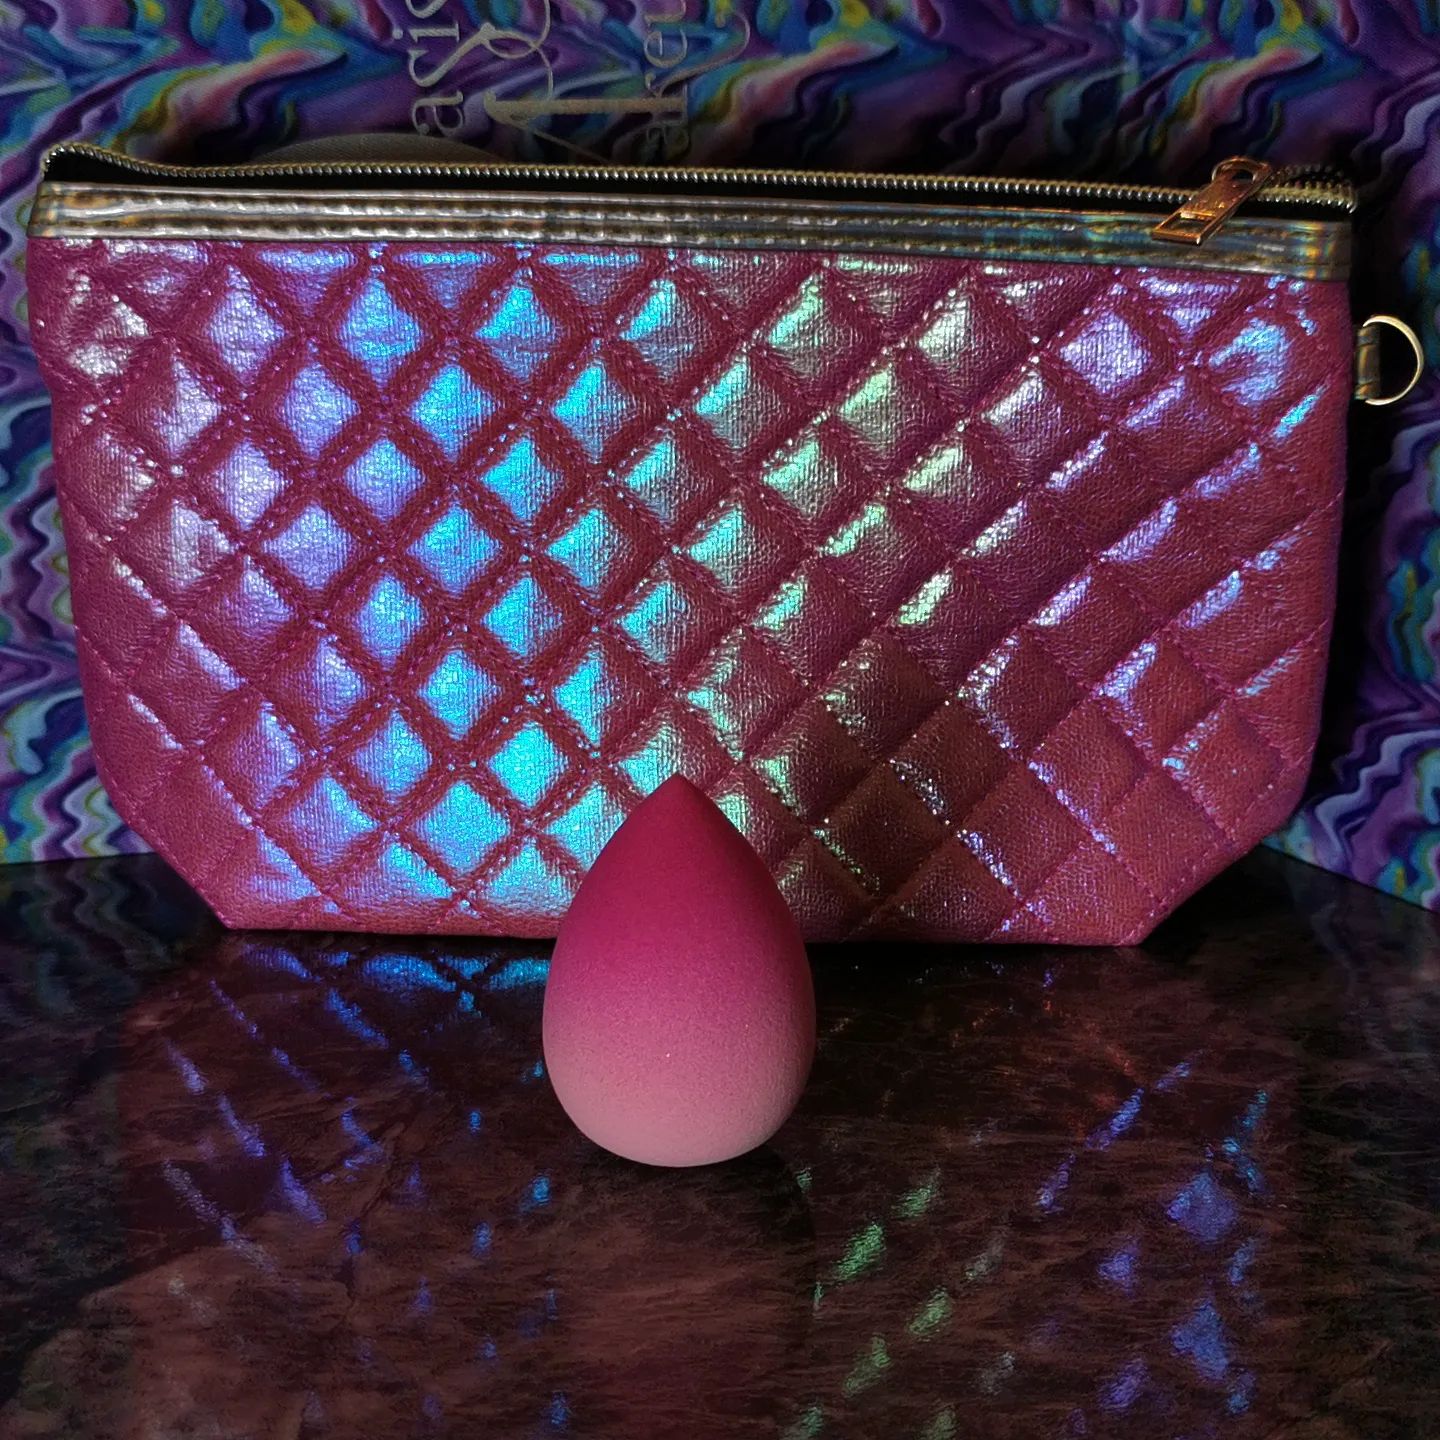 Holographic Reflective Clutch Makeup Bag - So cute!